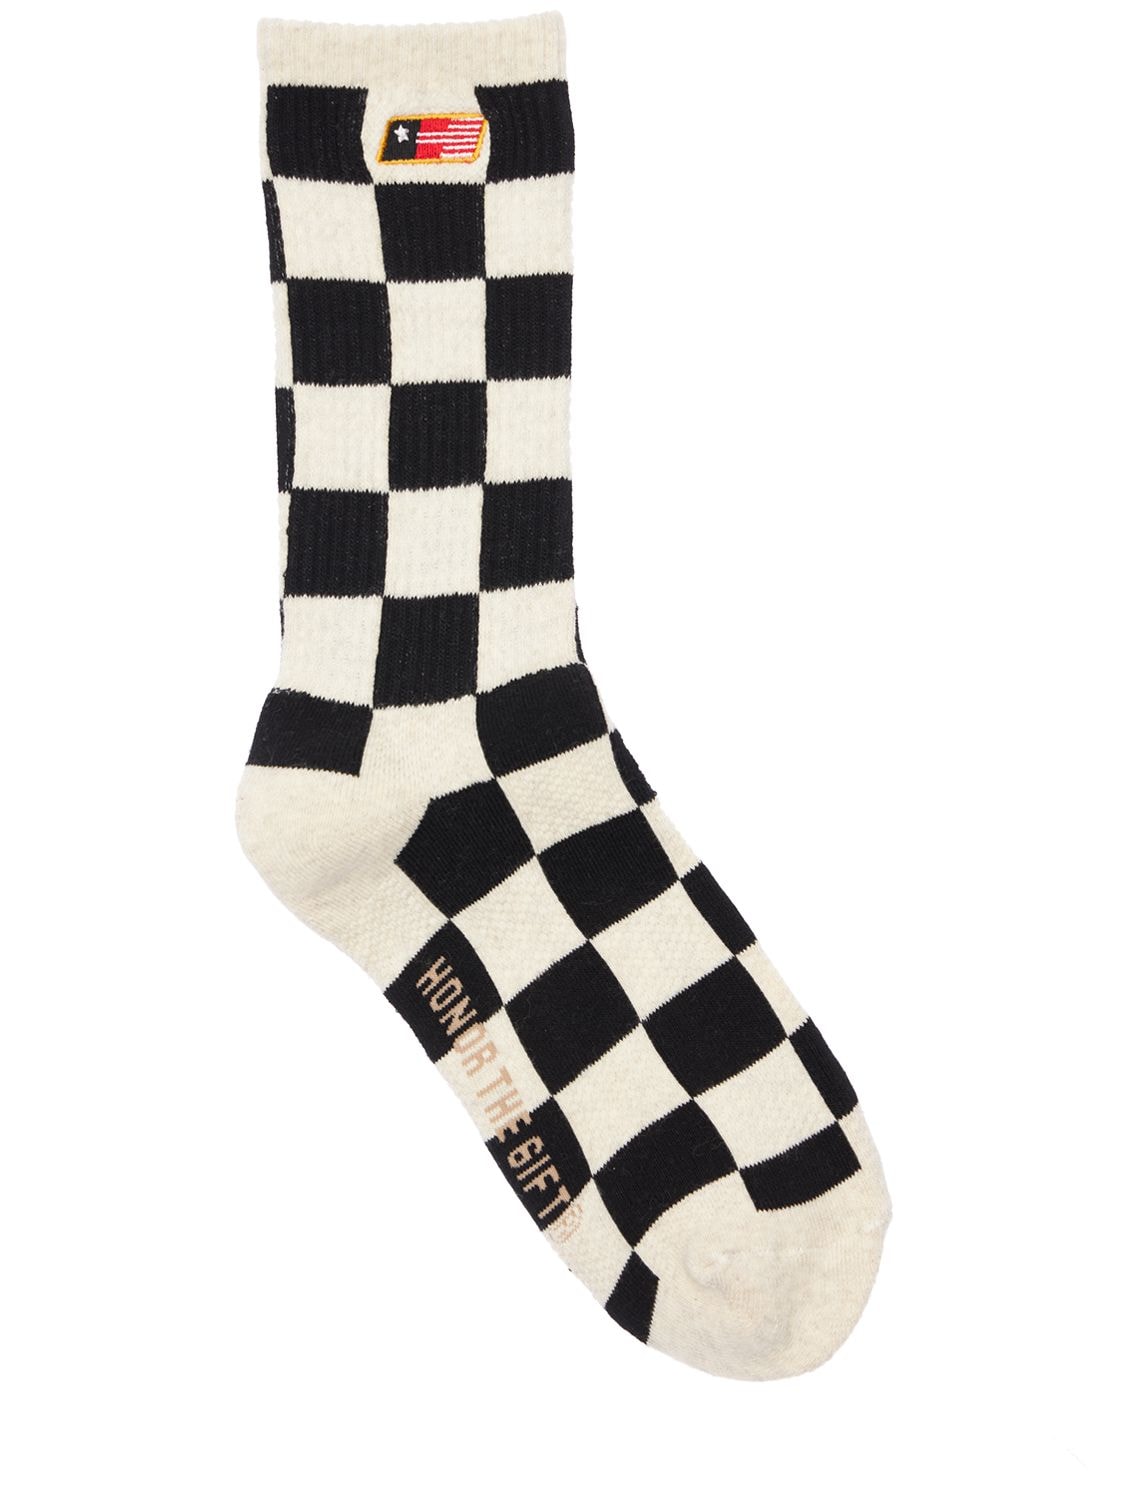 HONOR THE GIFT Checkered Cotton Blend Socks